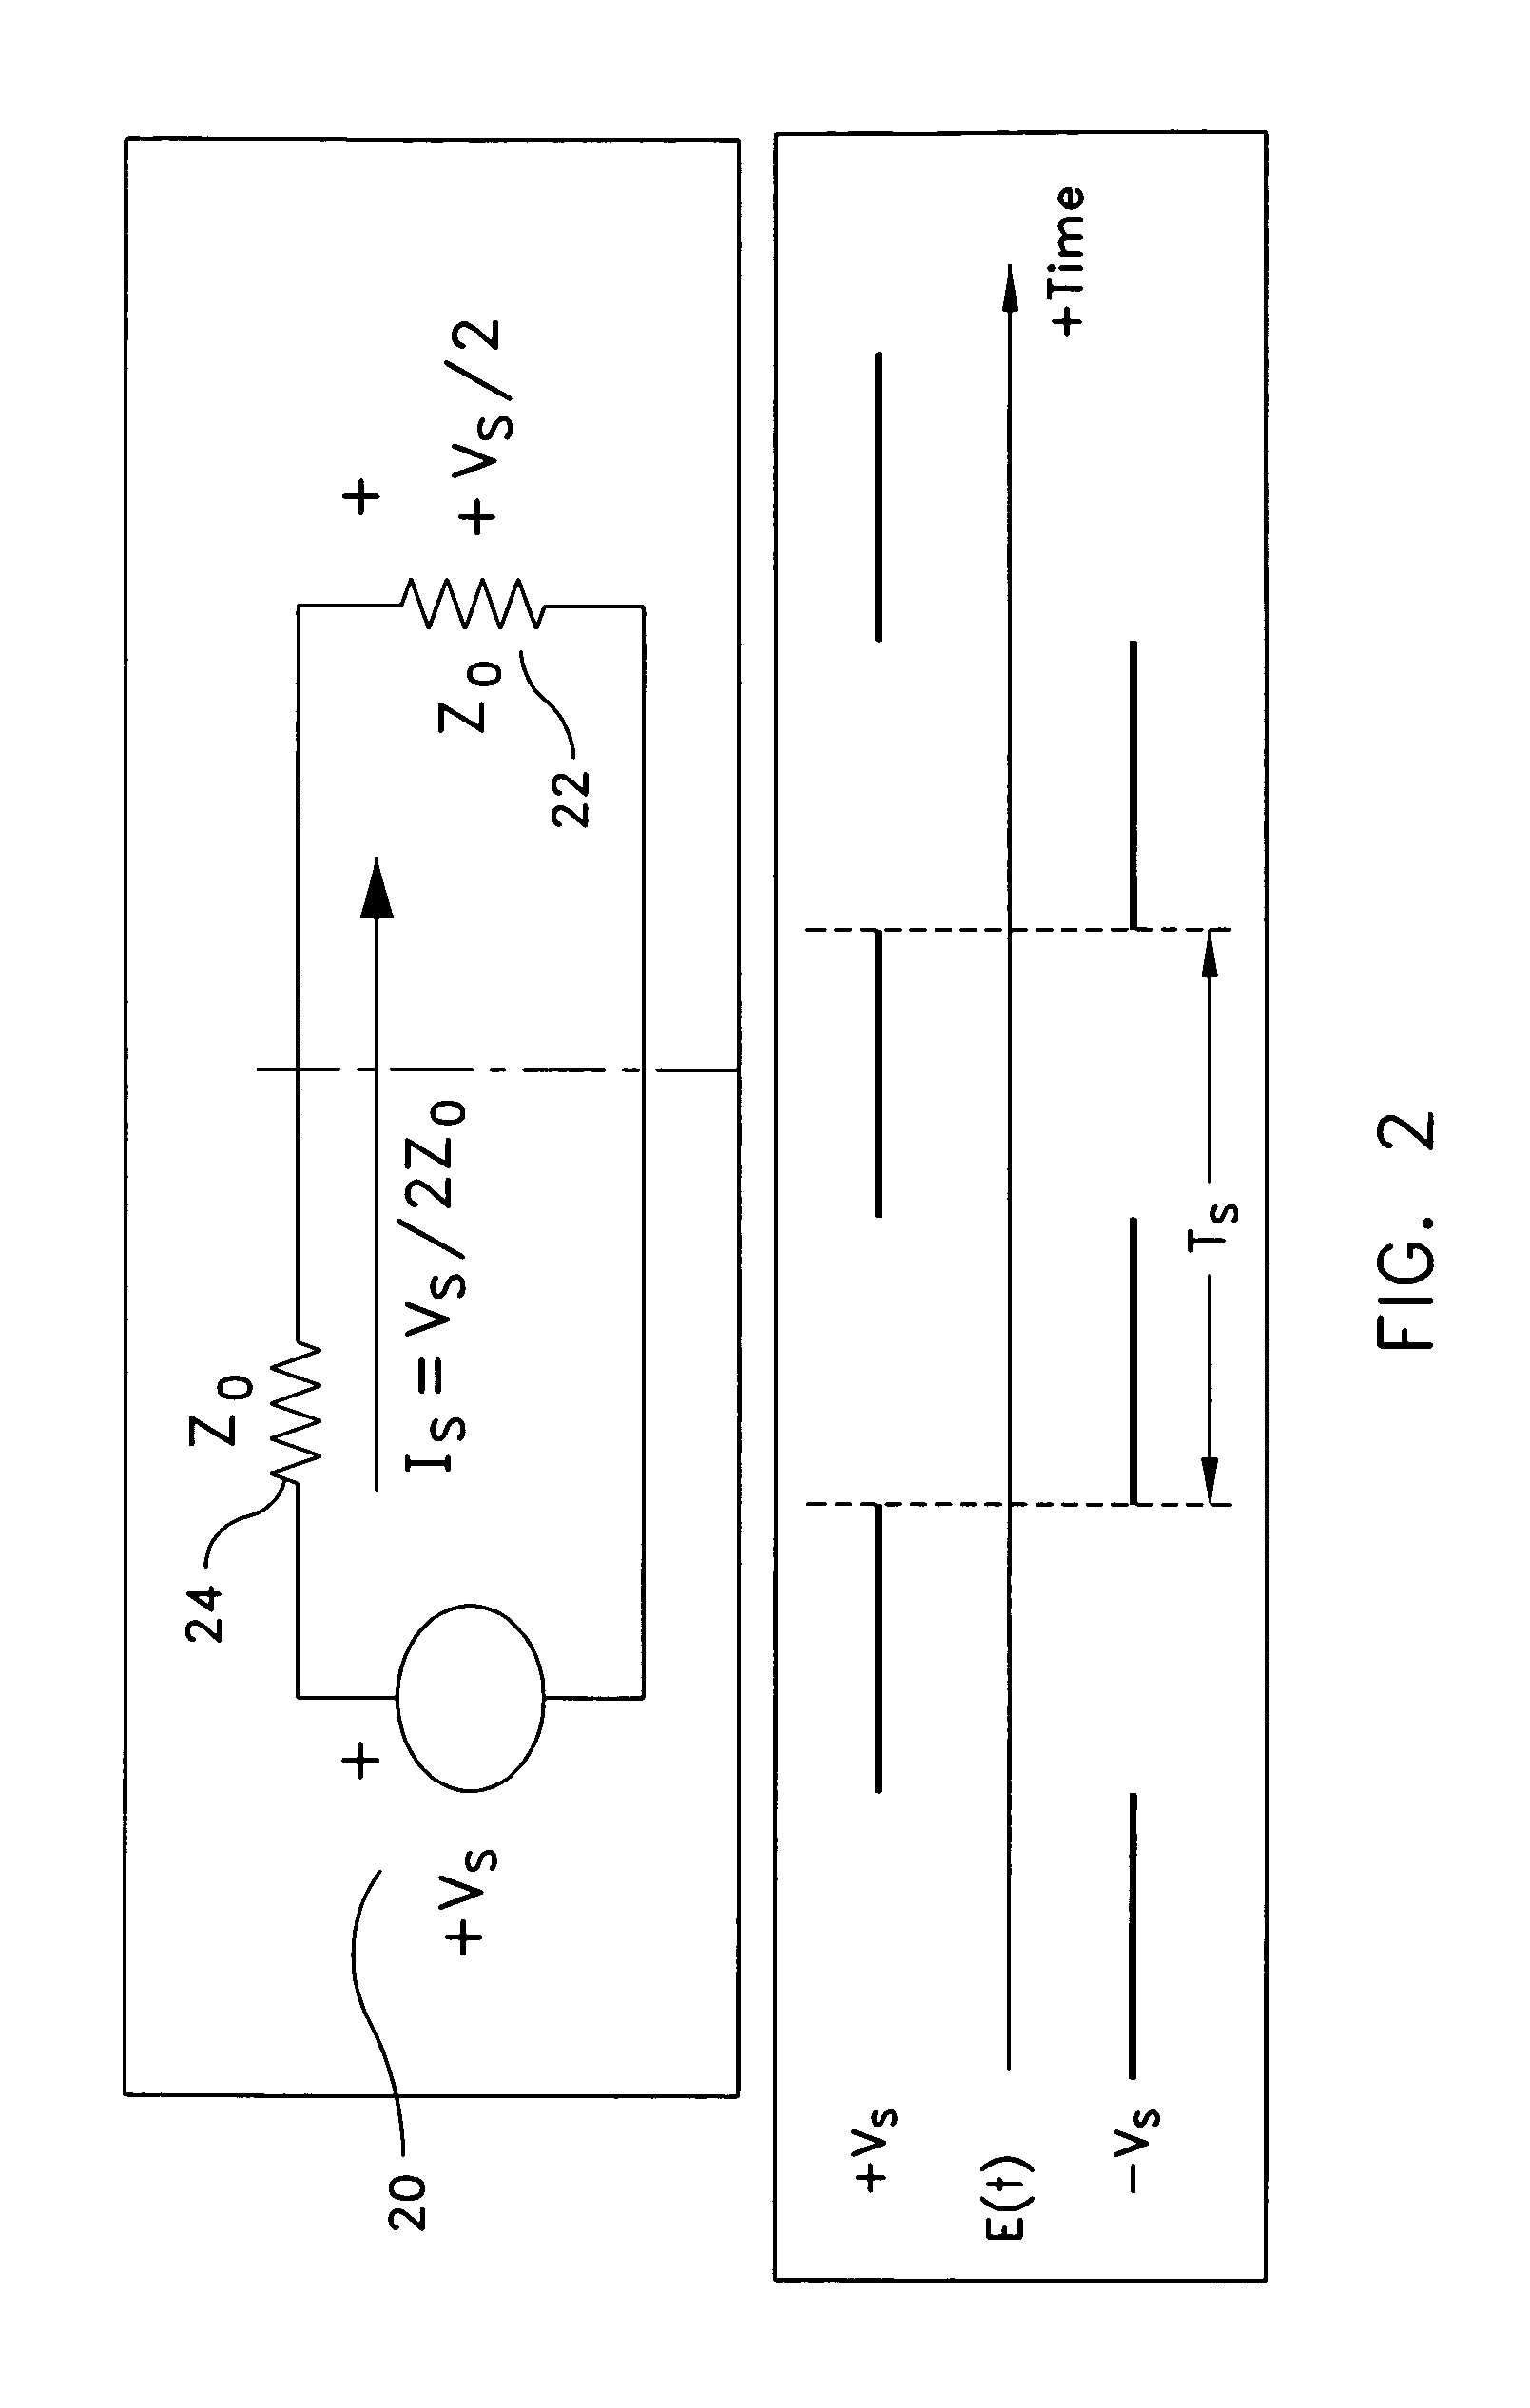 System and method for improving the efficiency and reliability of a broadband transistor switch for periodic switching applications